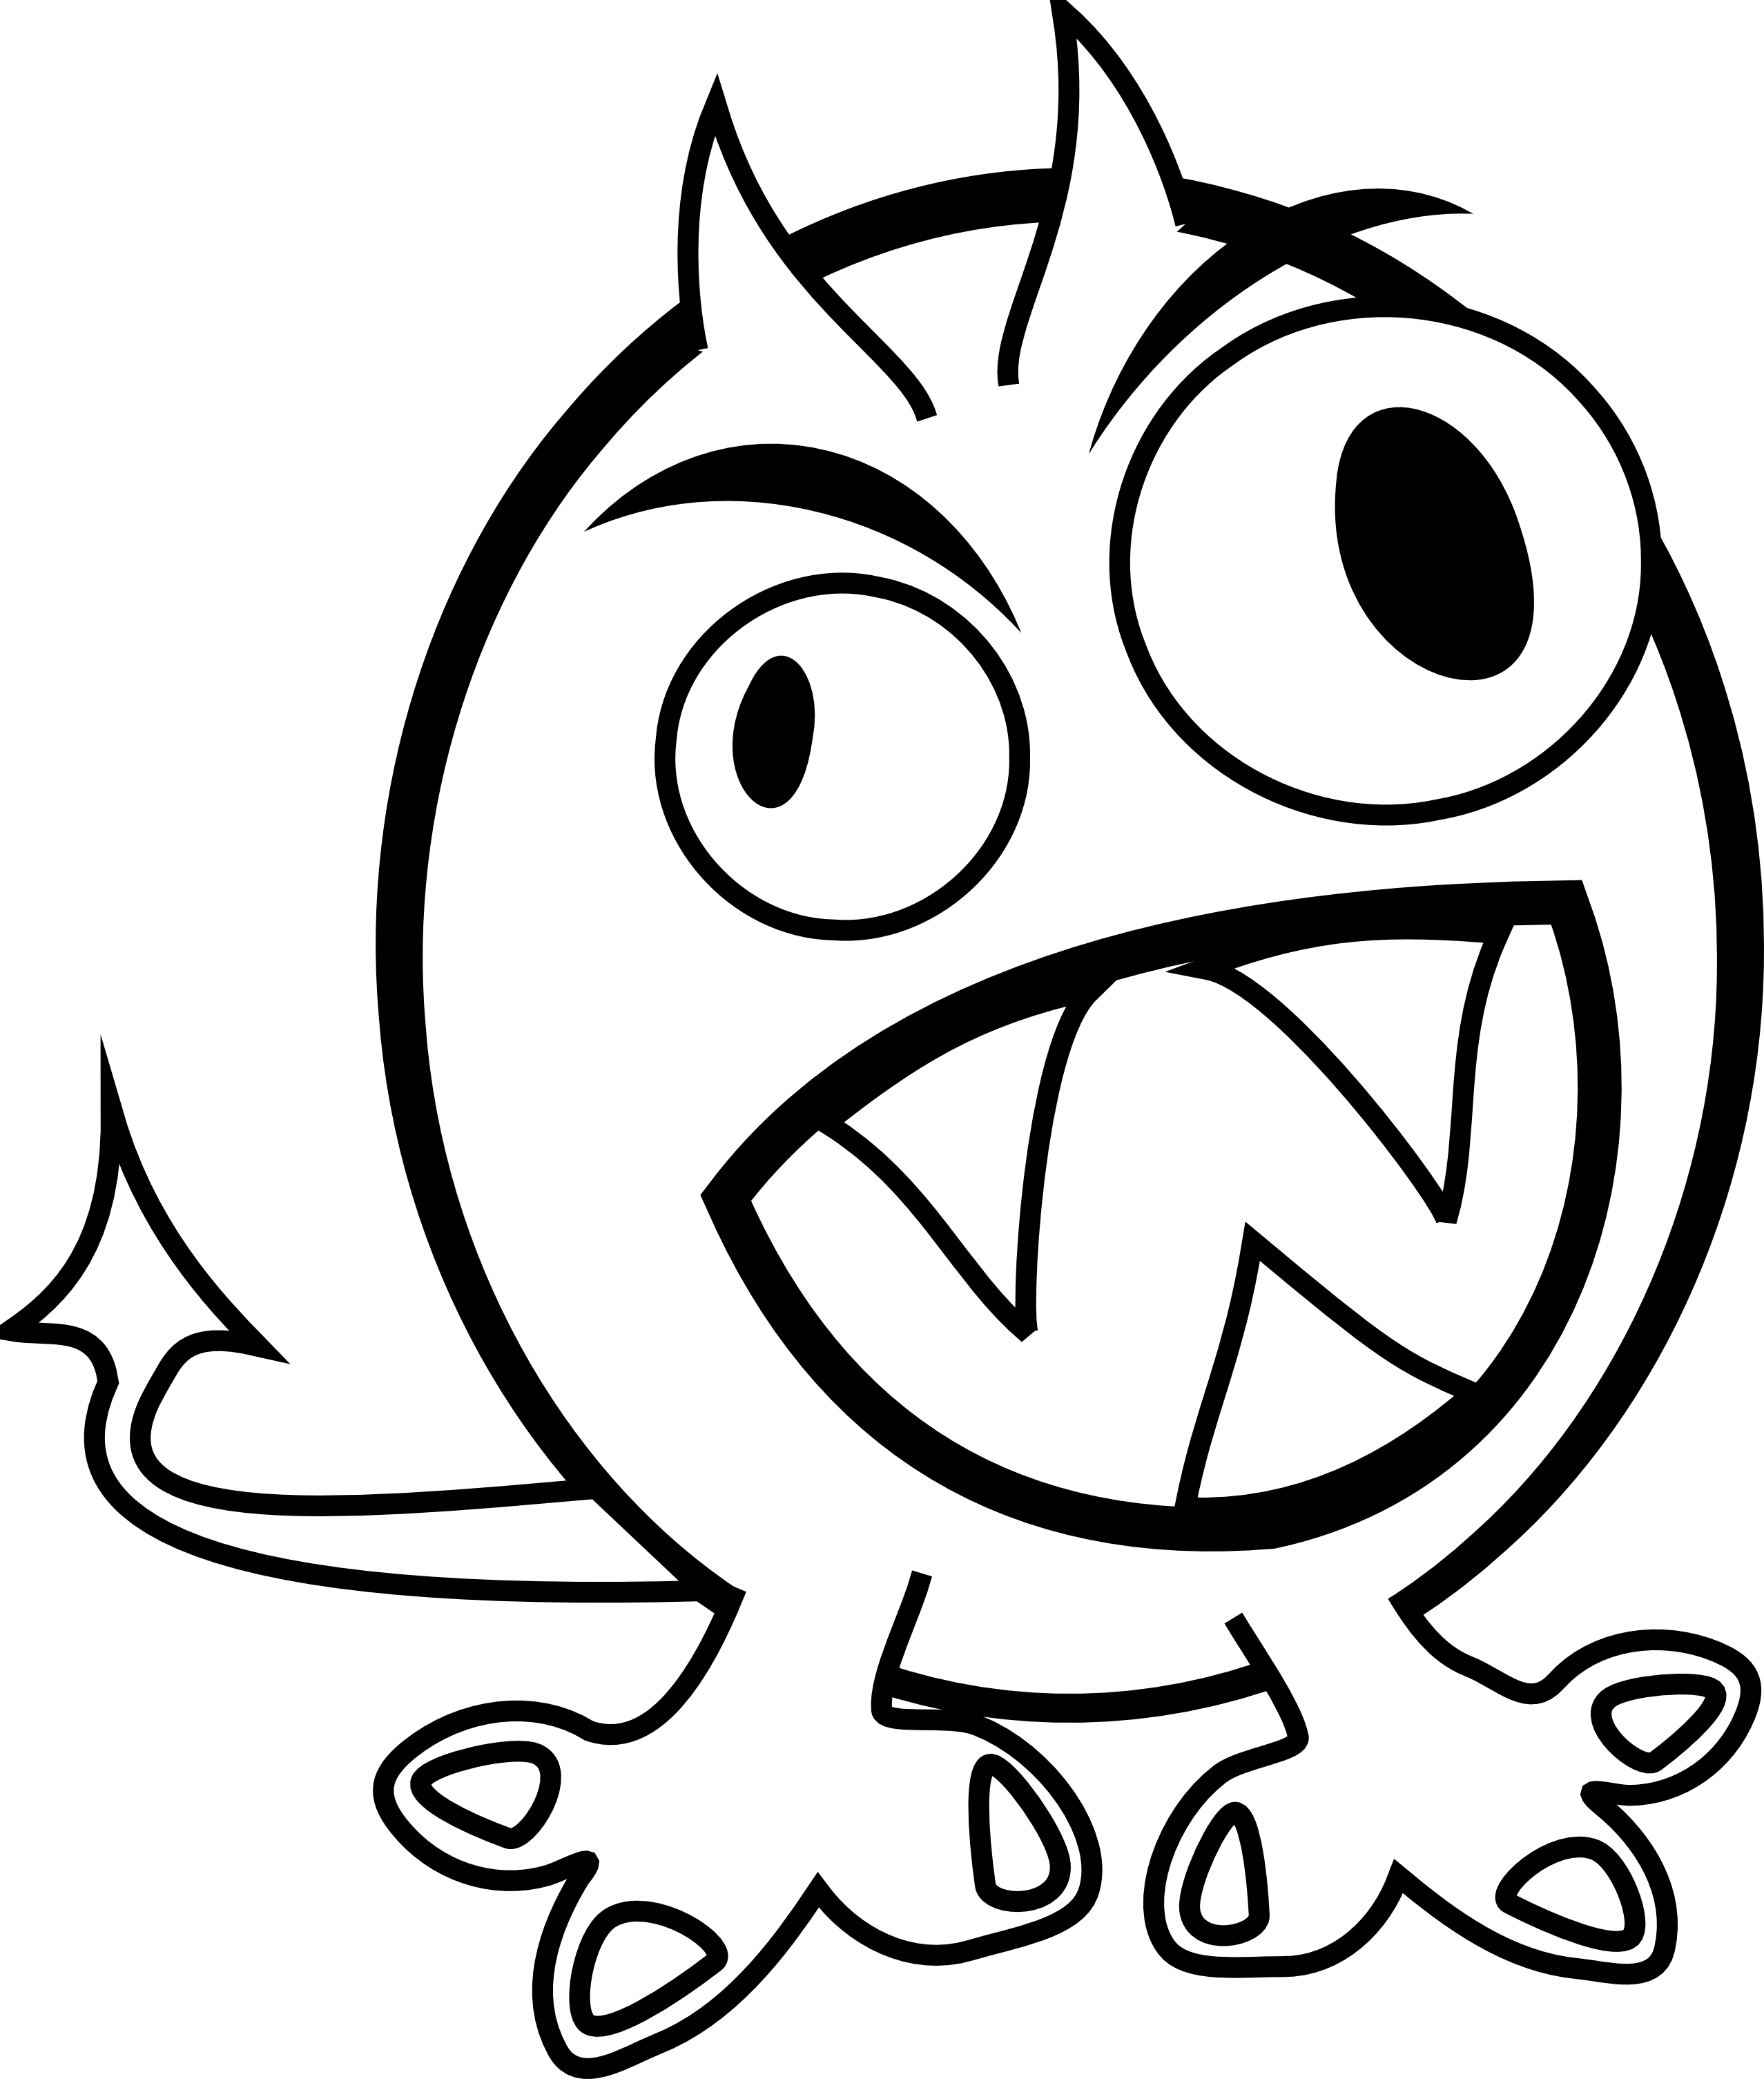 Clip Art: small Funny Angry Monster Black White ...